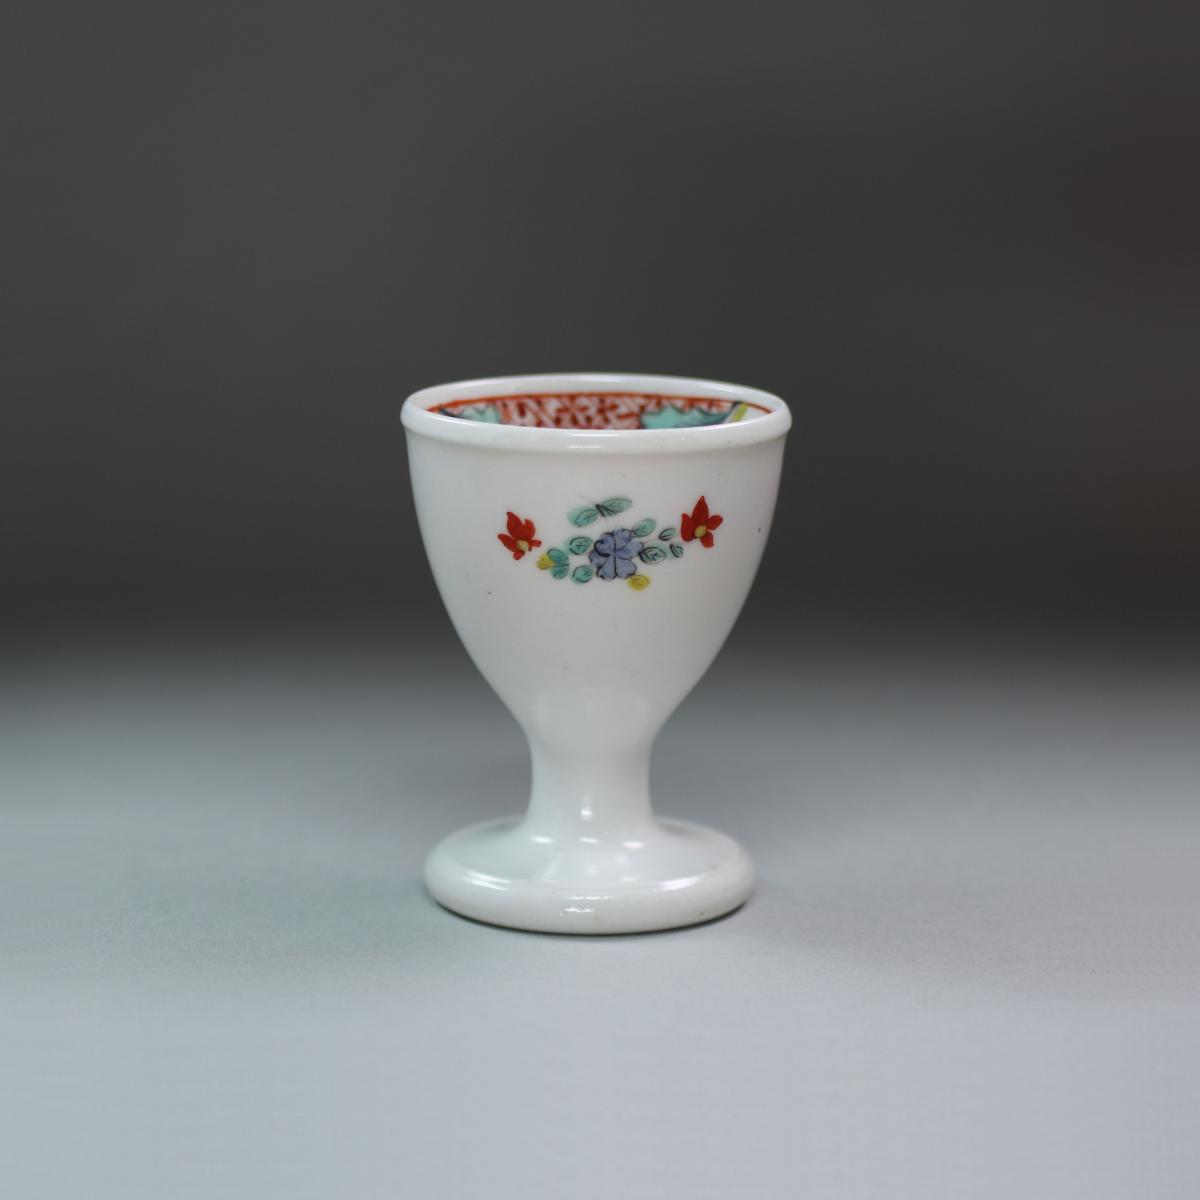 Chantilly egg-cup in the kakiemon palate, circa 1760